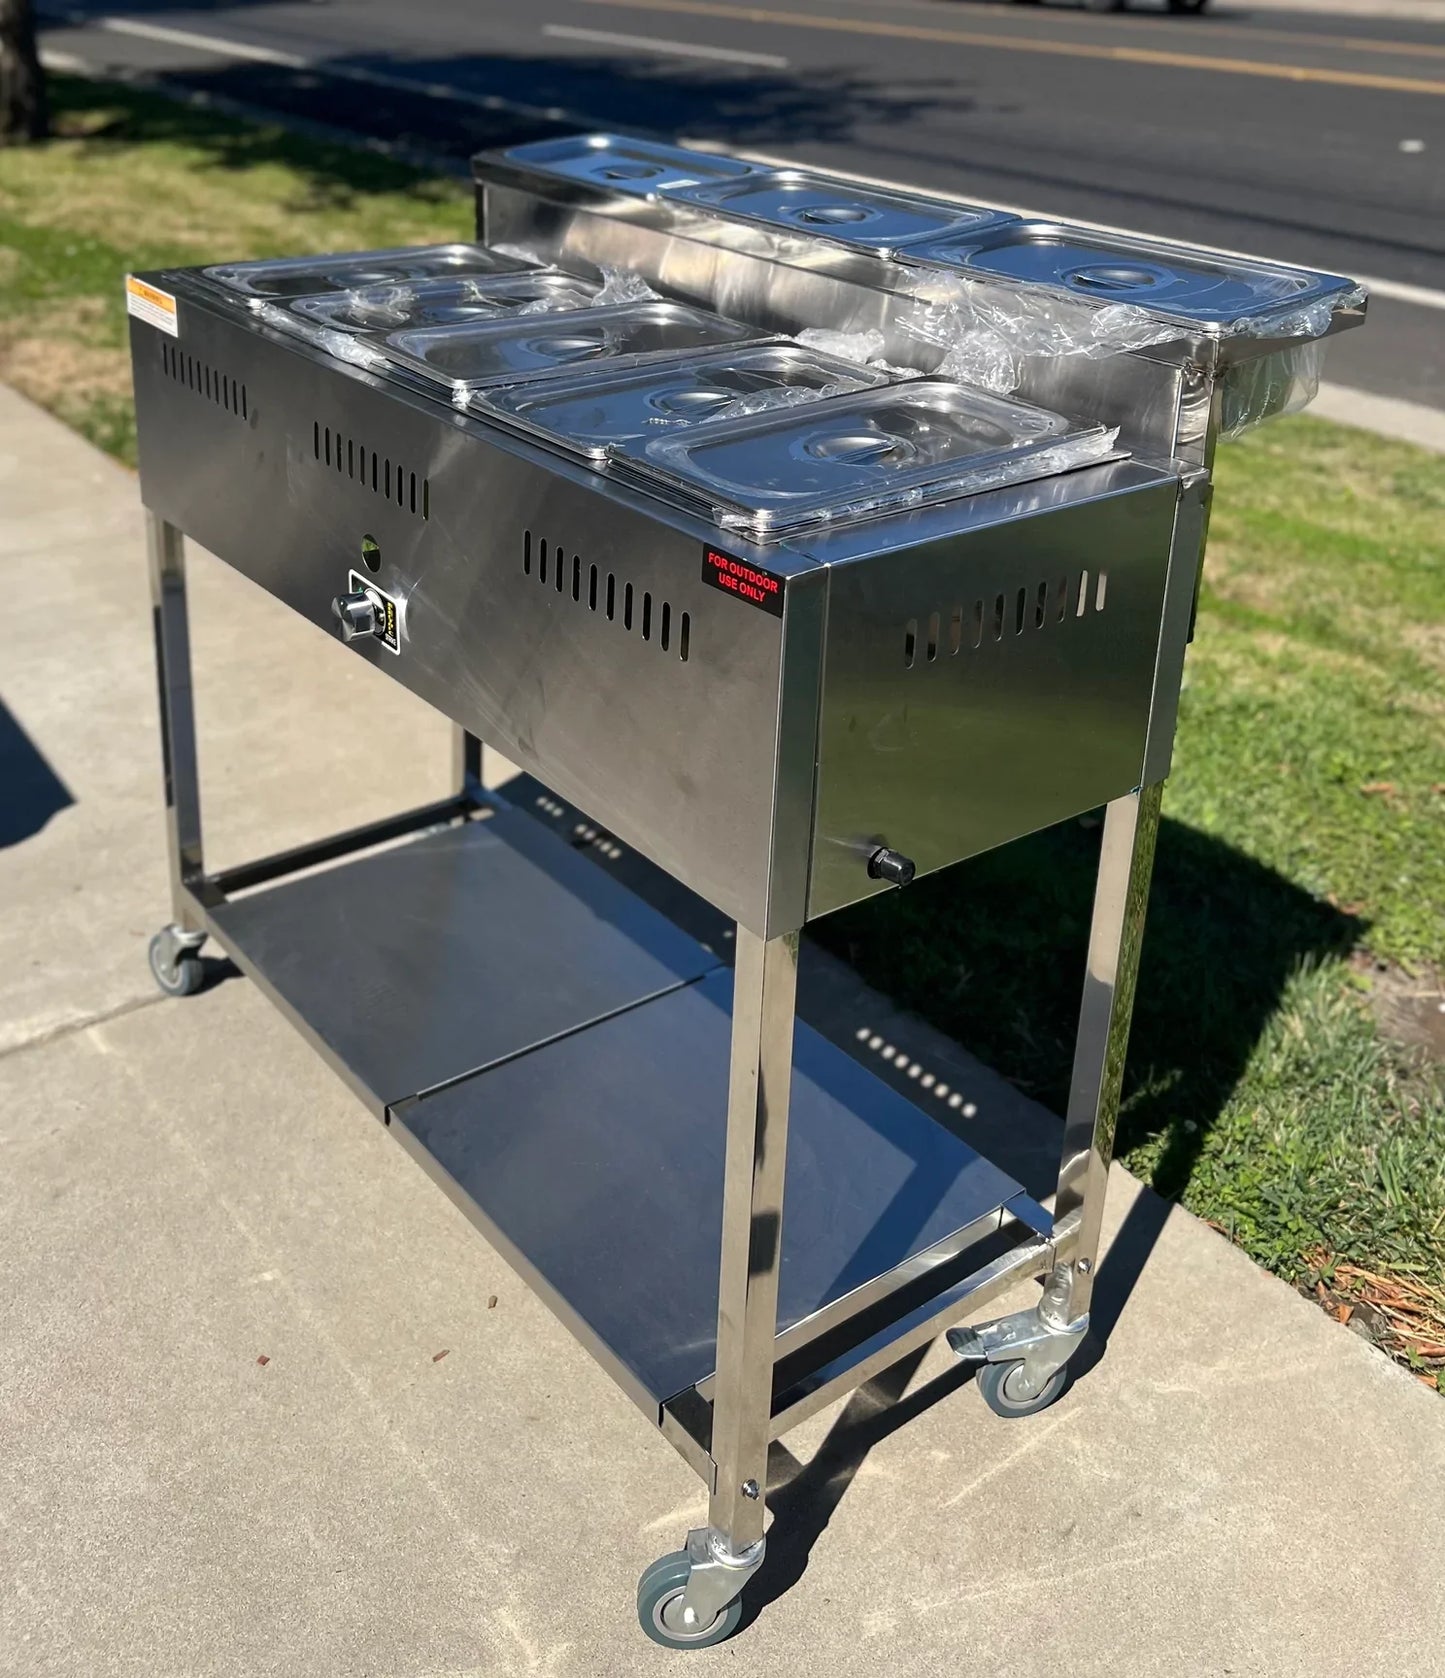 Warming Cart with Salsa Tray